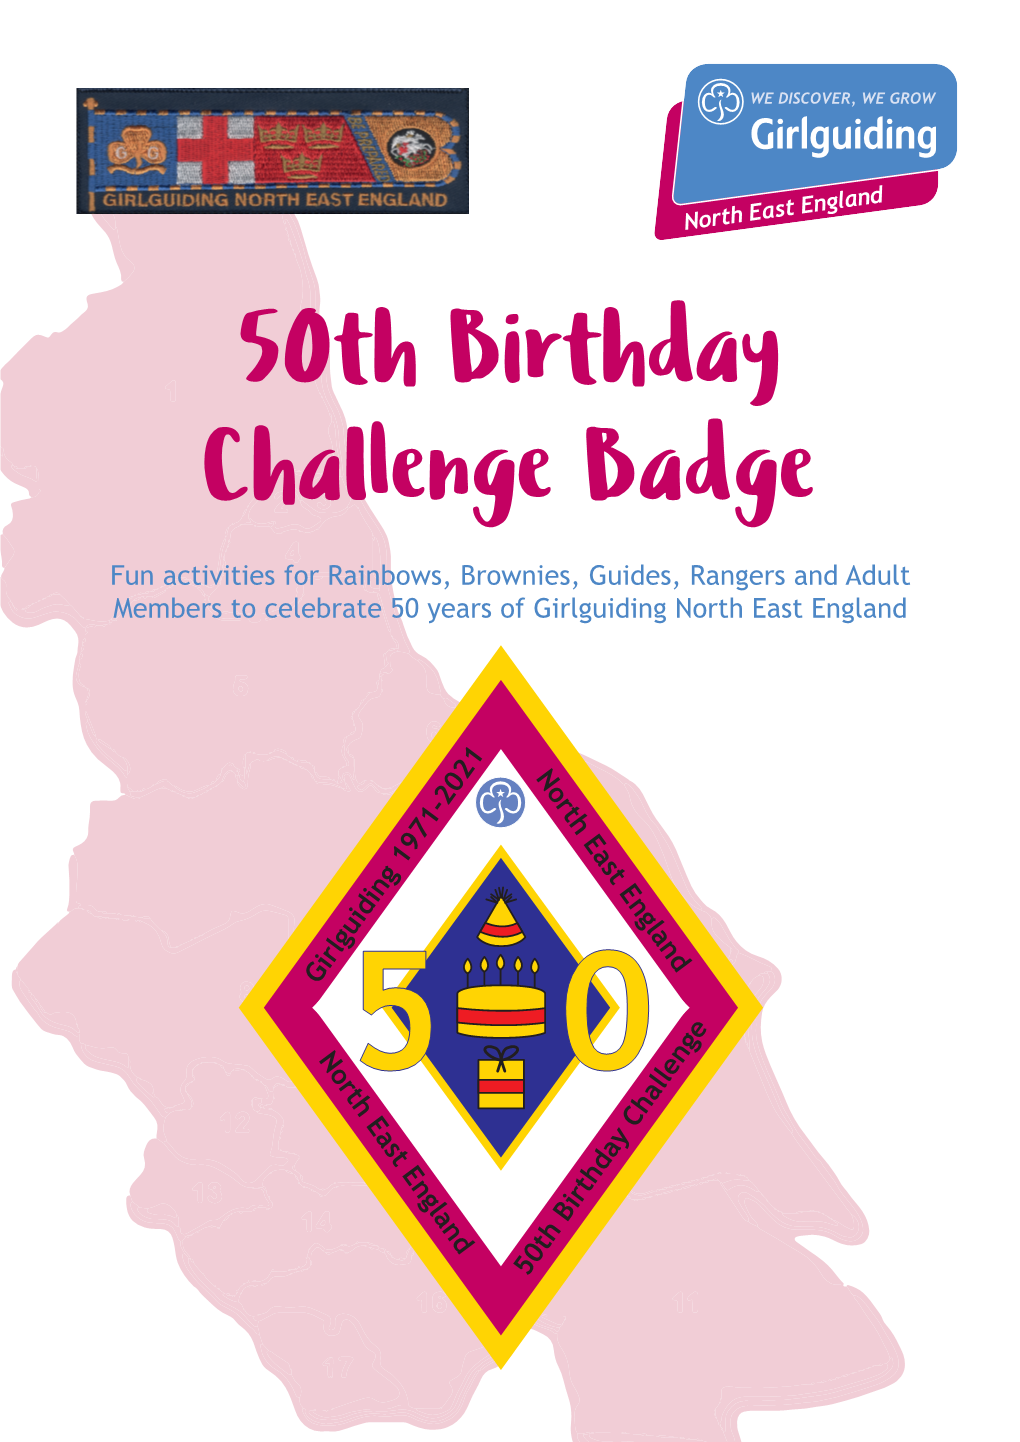 50Th Birthday Challenge Badge Fun Activities for Rainbows, Brownies, Guides, Rangers and Adult Members to Celebrate 50 Years of Girlguiding North East England